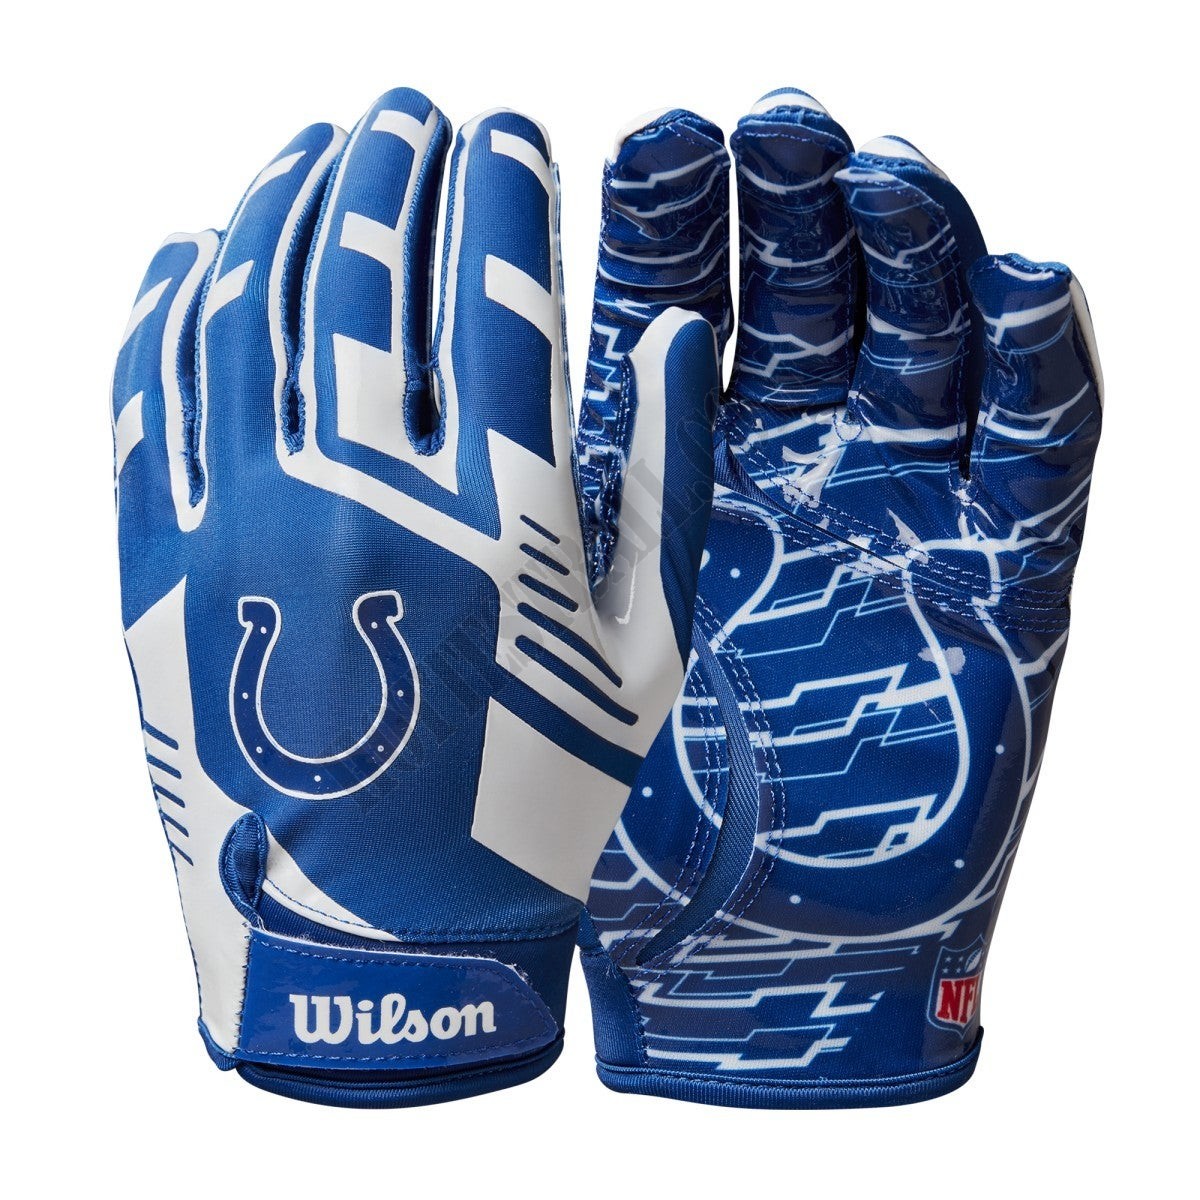 NFL Stretch Fit Receivers Gloves - Indianapolis Colts ● Wilson Promotions - NFL Stretch Fit Receivers Gloves - Indianapolis Colts ● Wilson Promotions